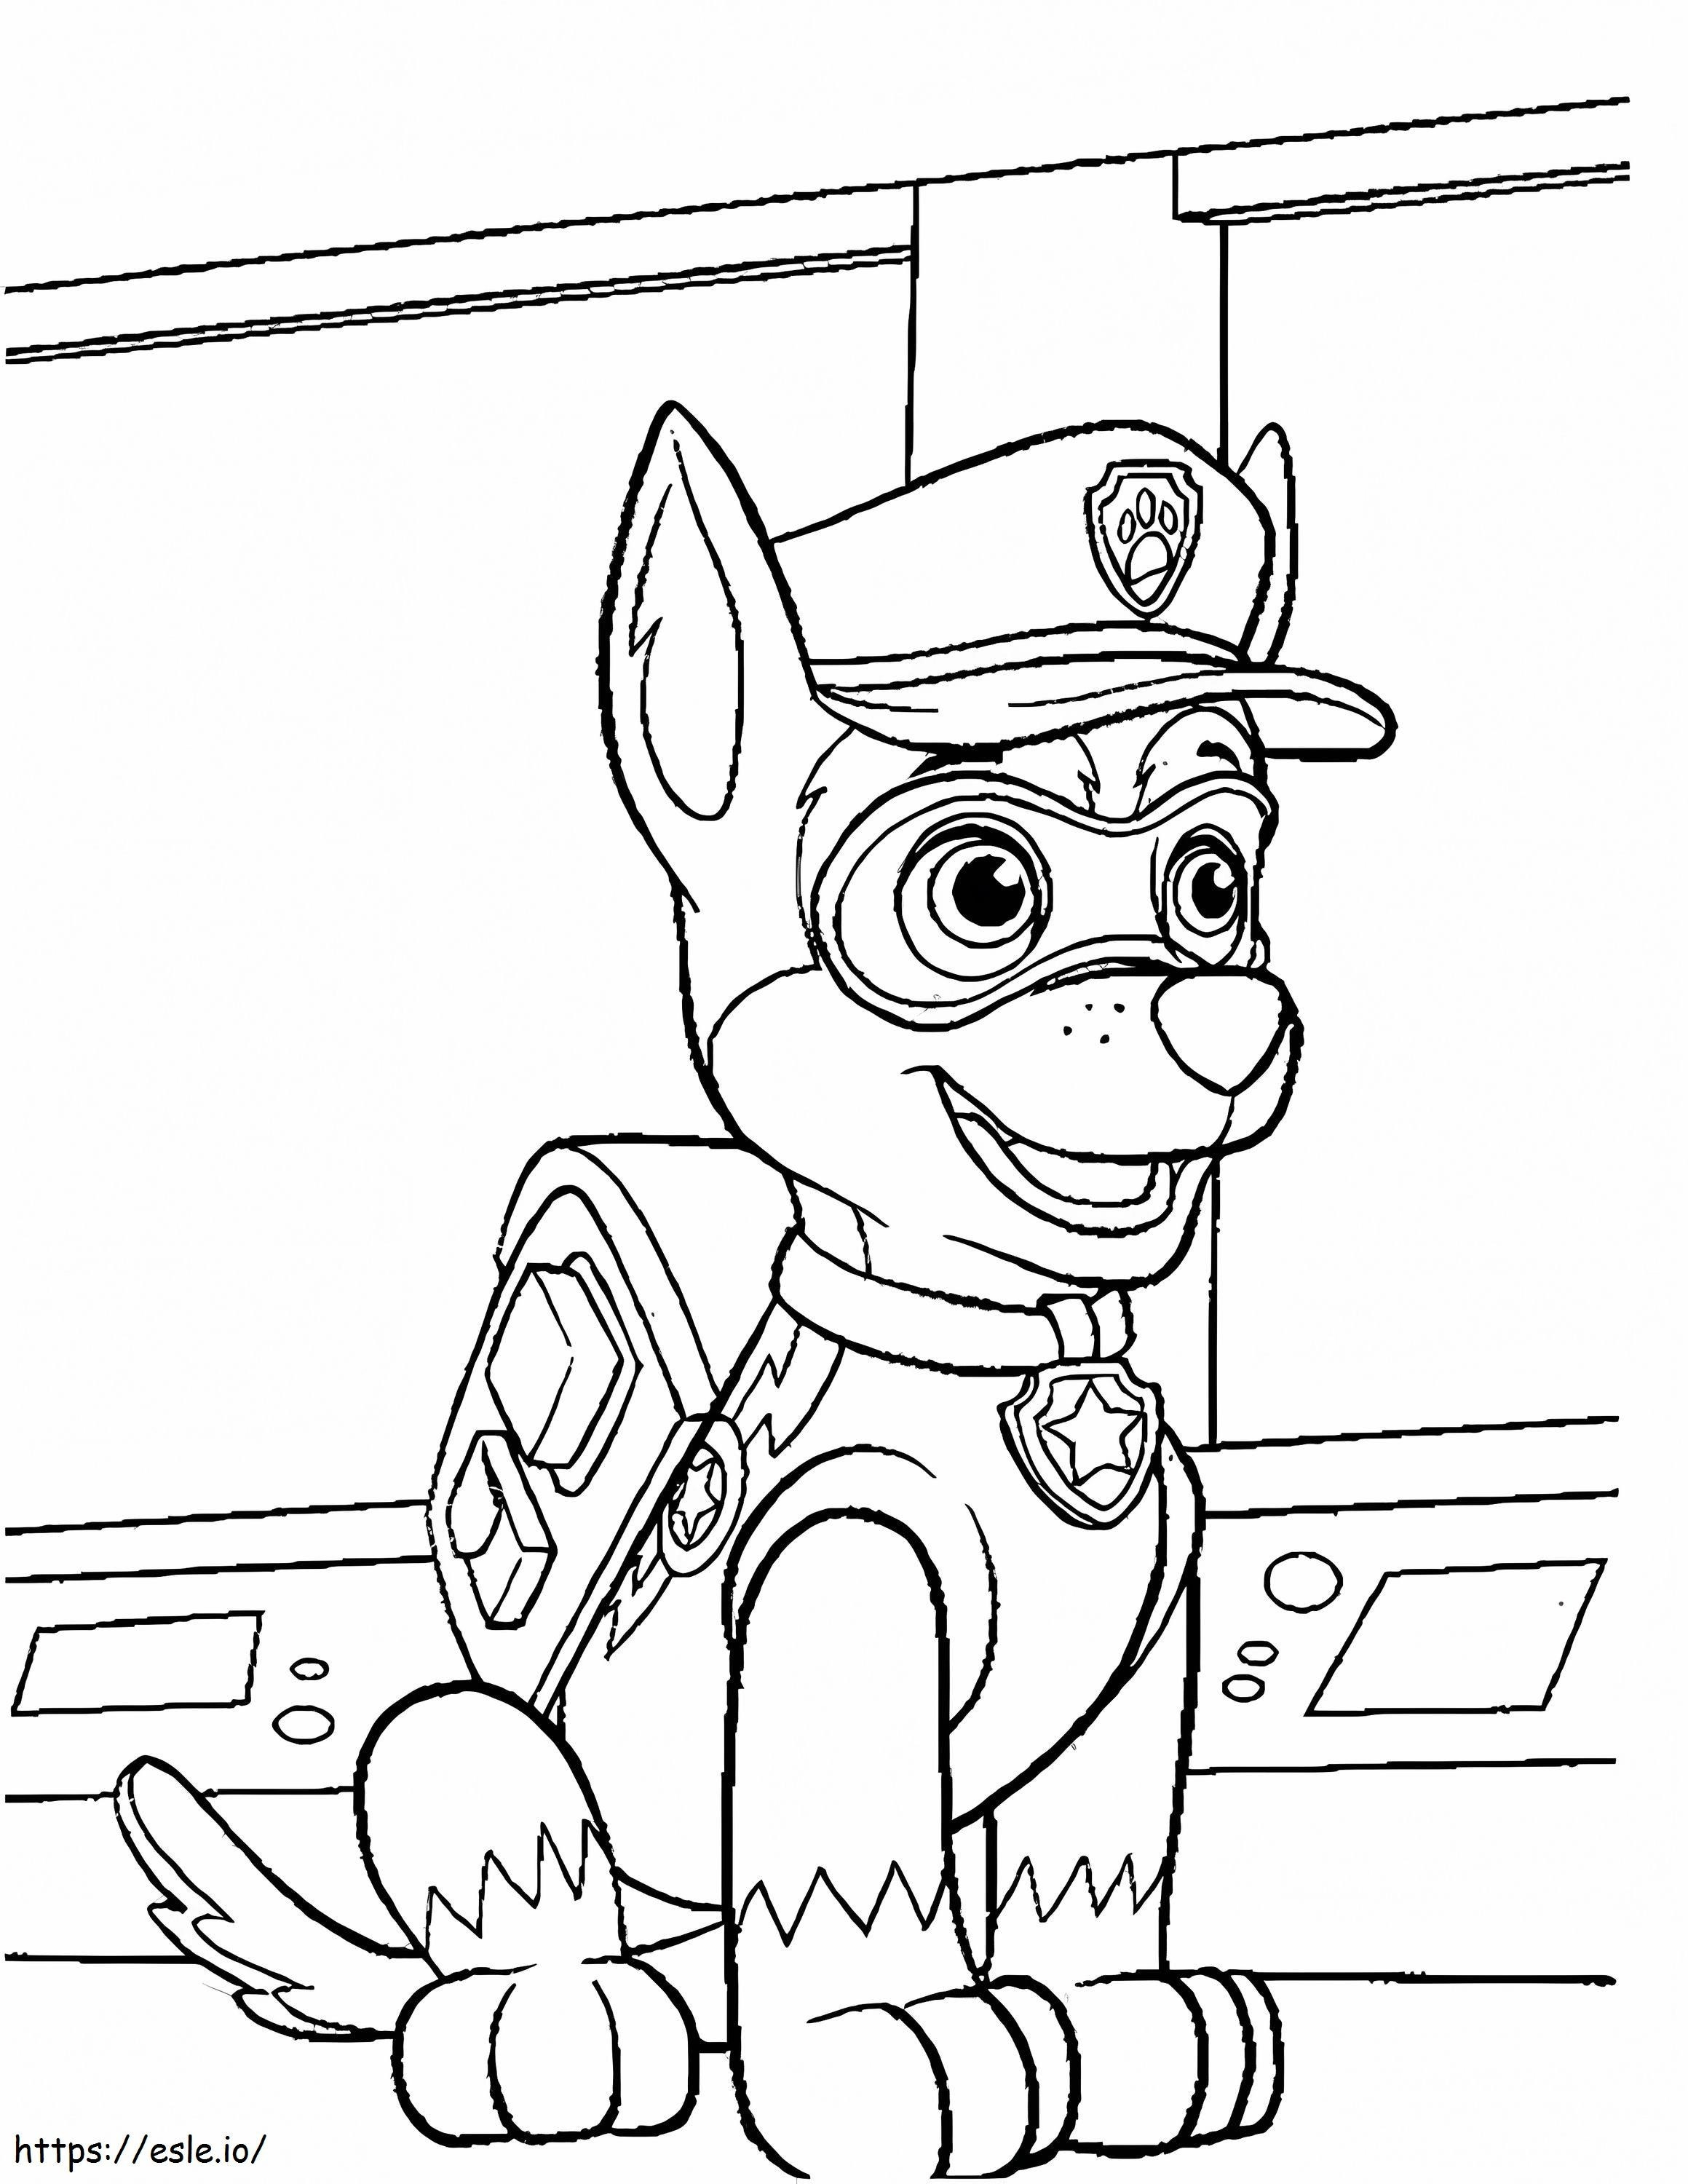 Chase Paw Patrol 17 coloring page